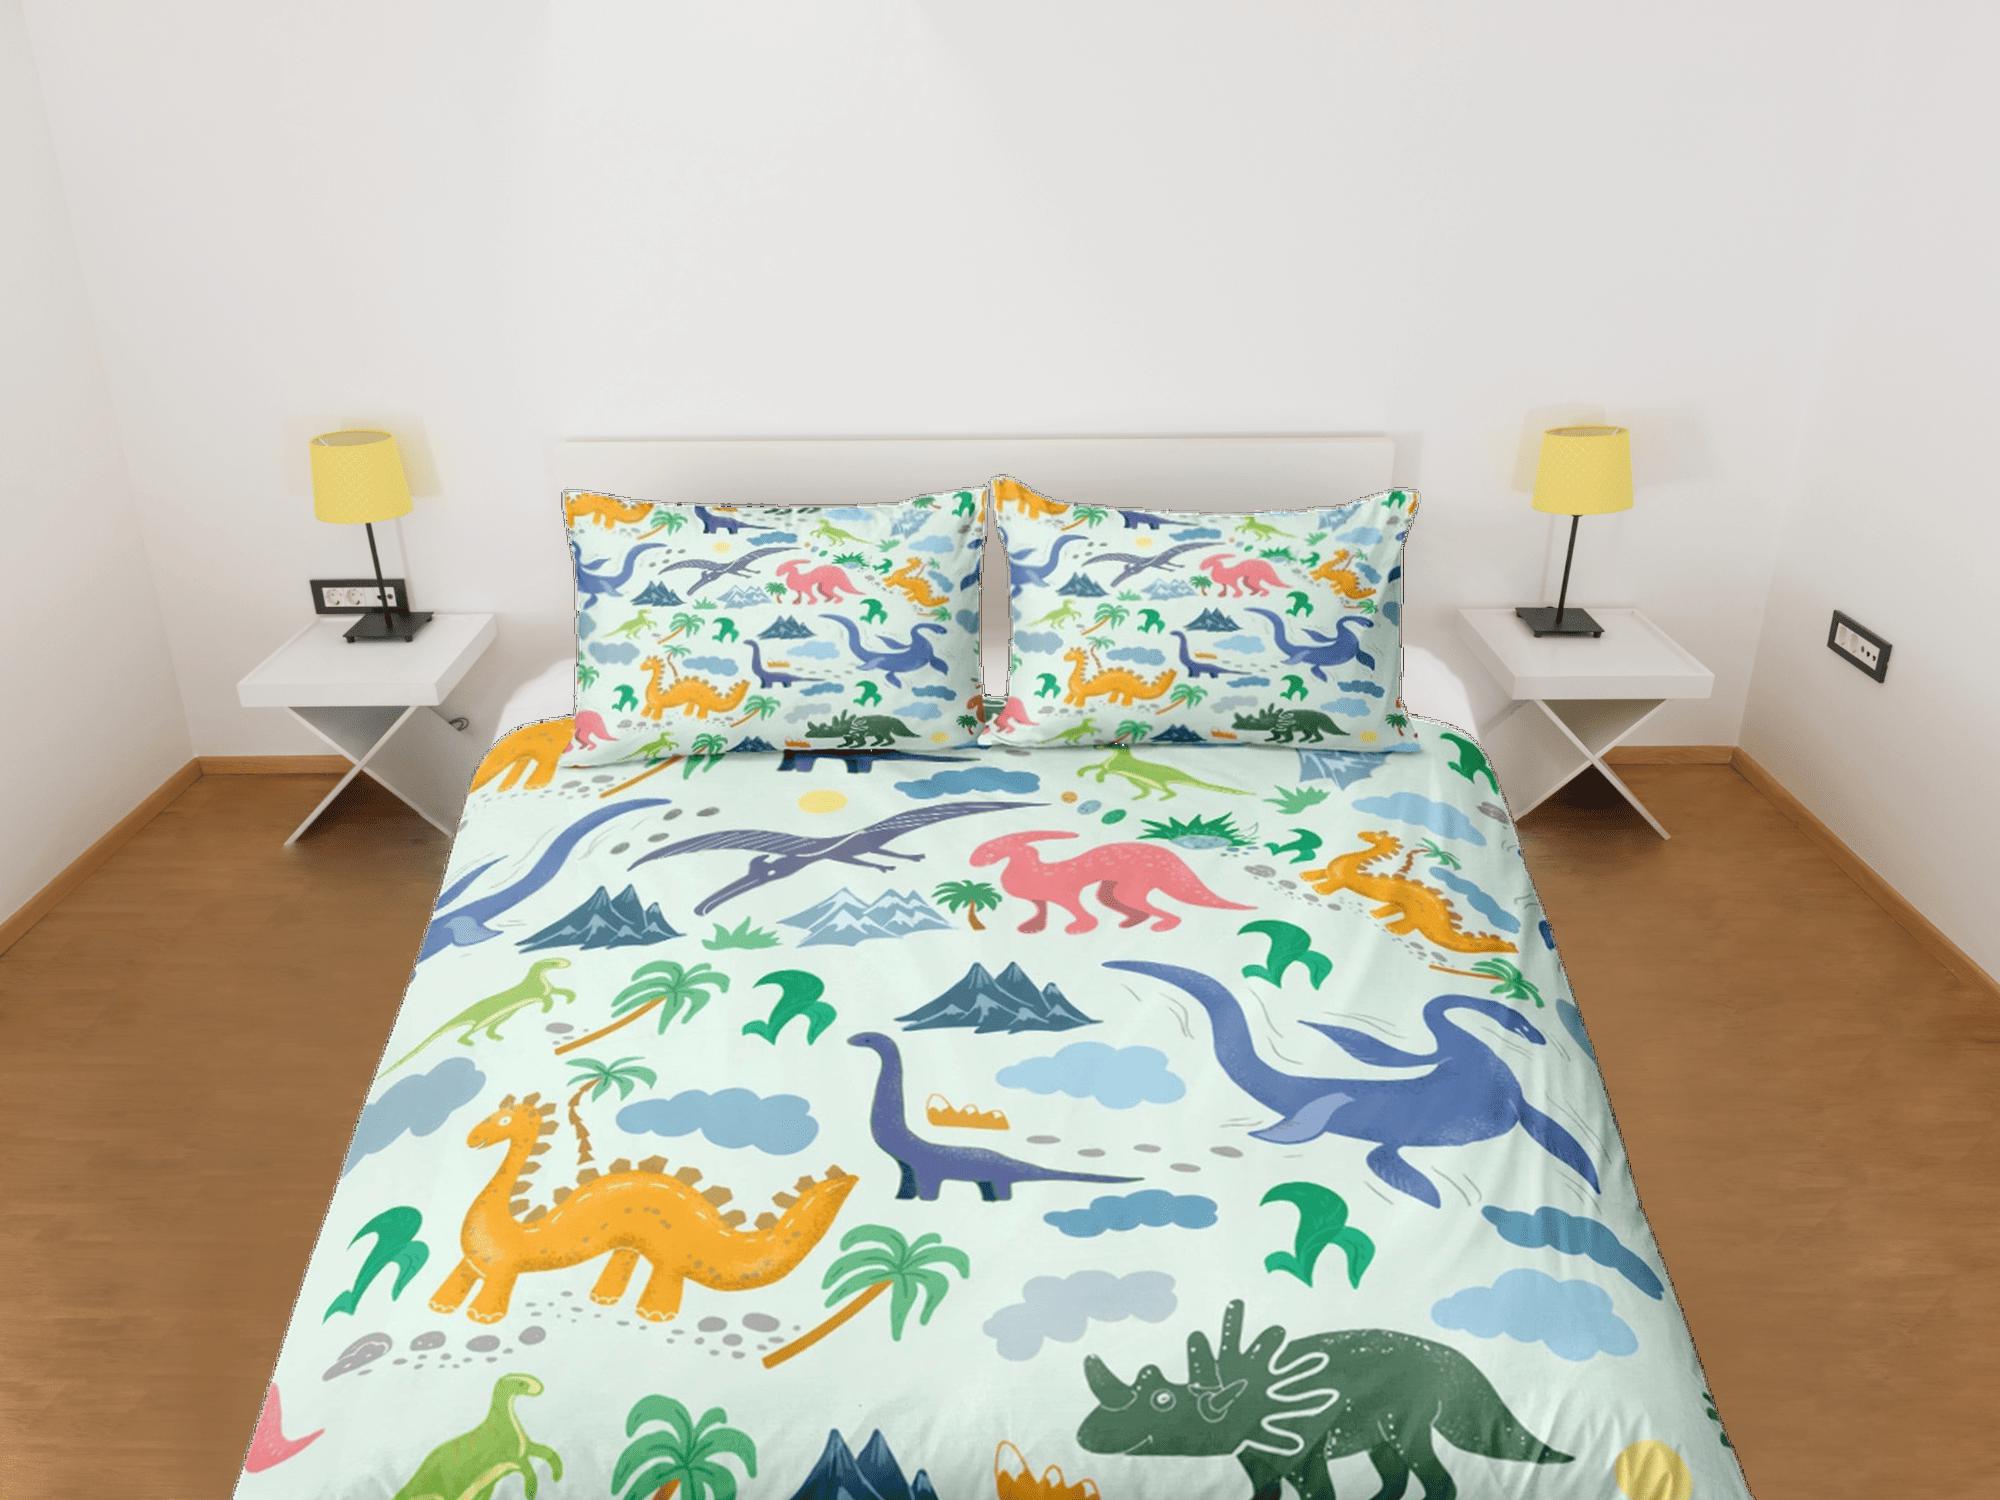 daintyduvet Dinosaurs Duvet Cover Set Colorful Bedspread, Kids Full Bedding Set with Pillowcase, Comforter Cover Bed